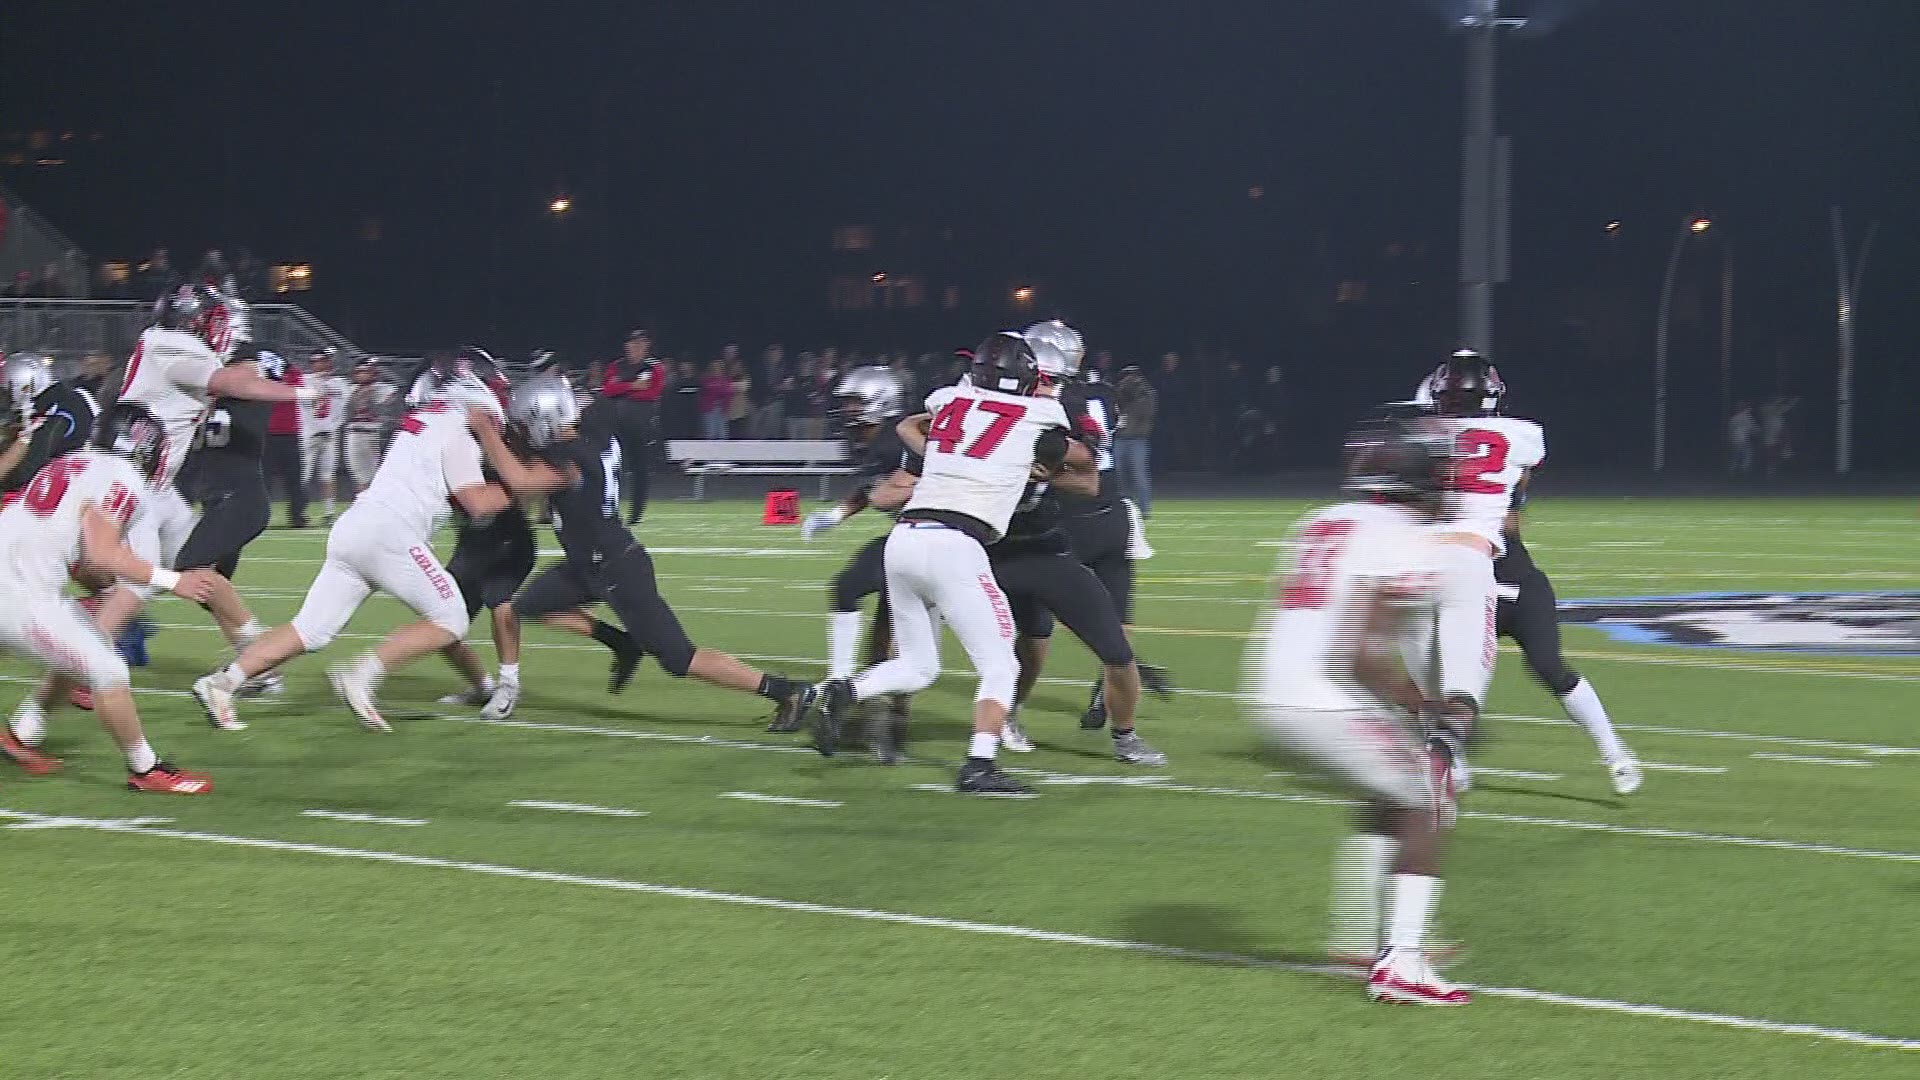 Highlights of Mountainside's 17-7 win over Clackamas in the first round of the playoffs. Highlights are part of Friday Night Flights with Orlando Sanchez.